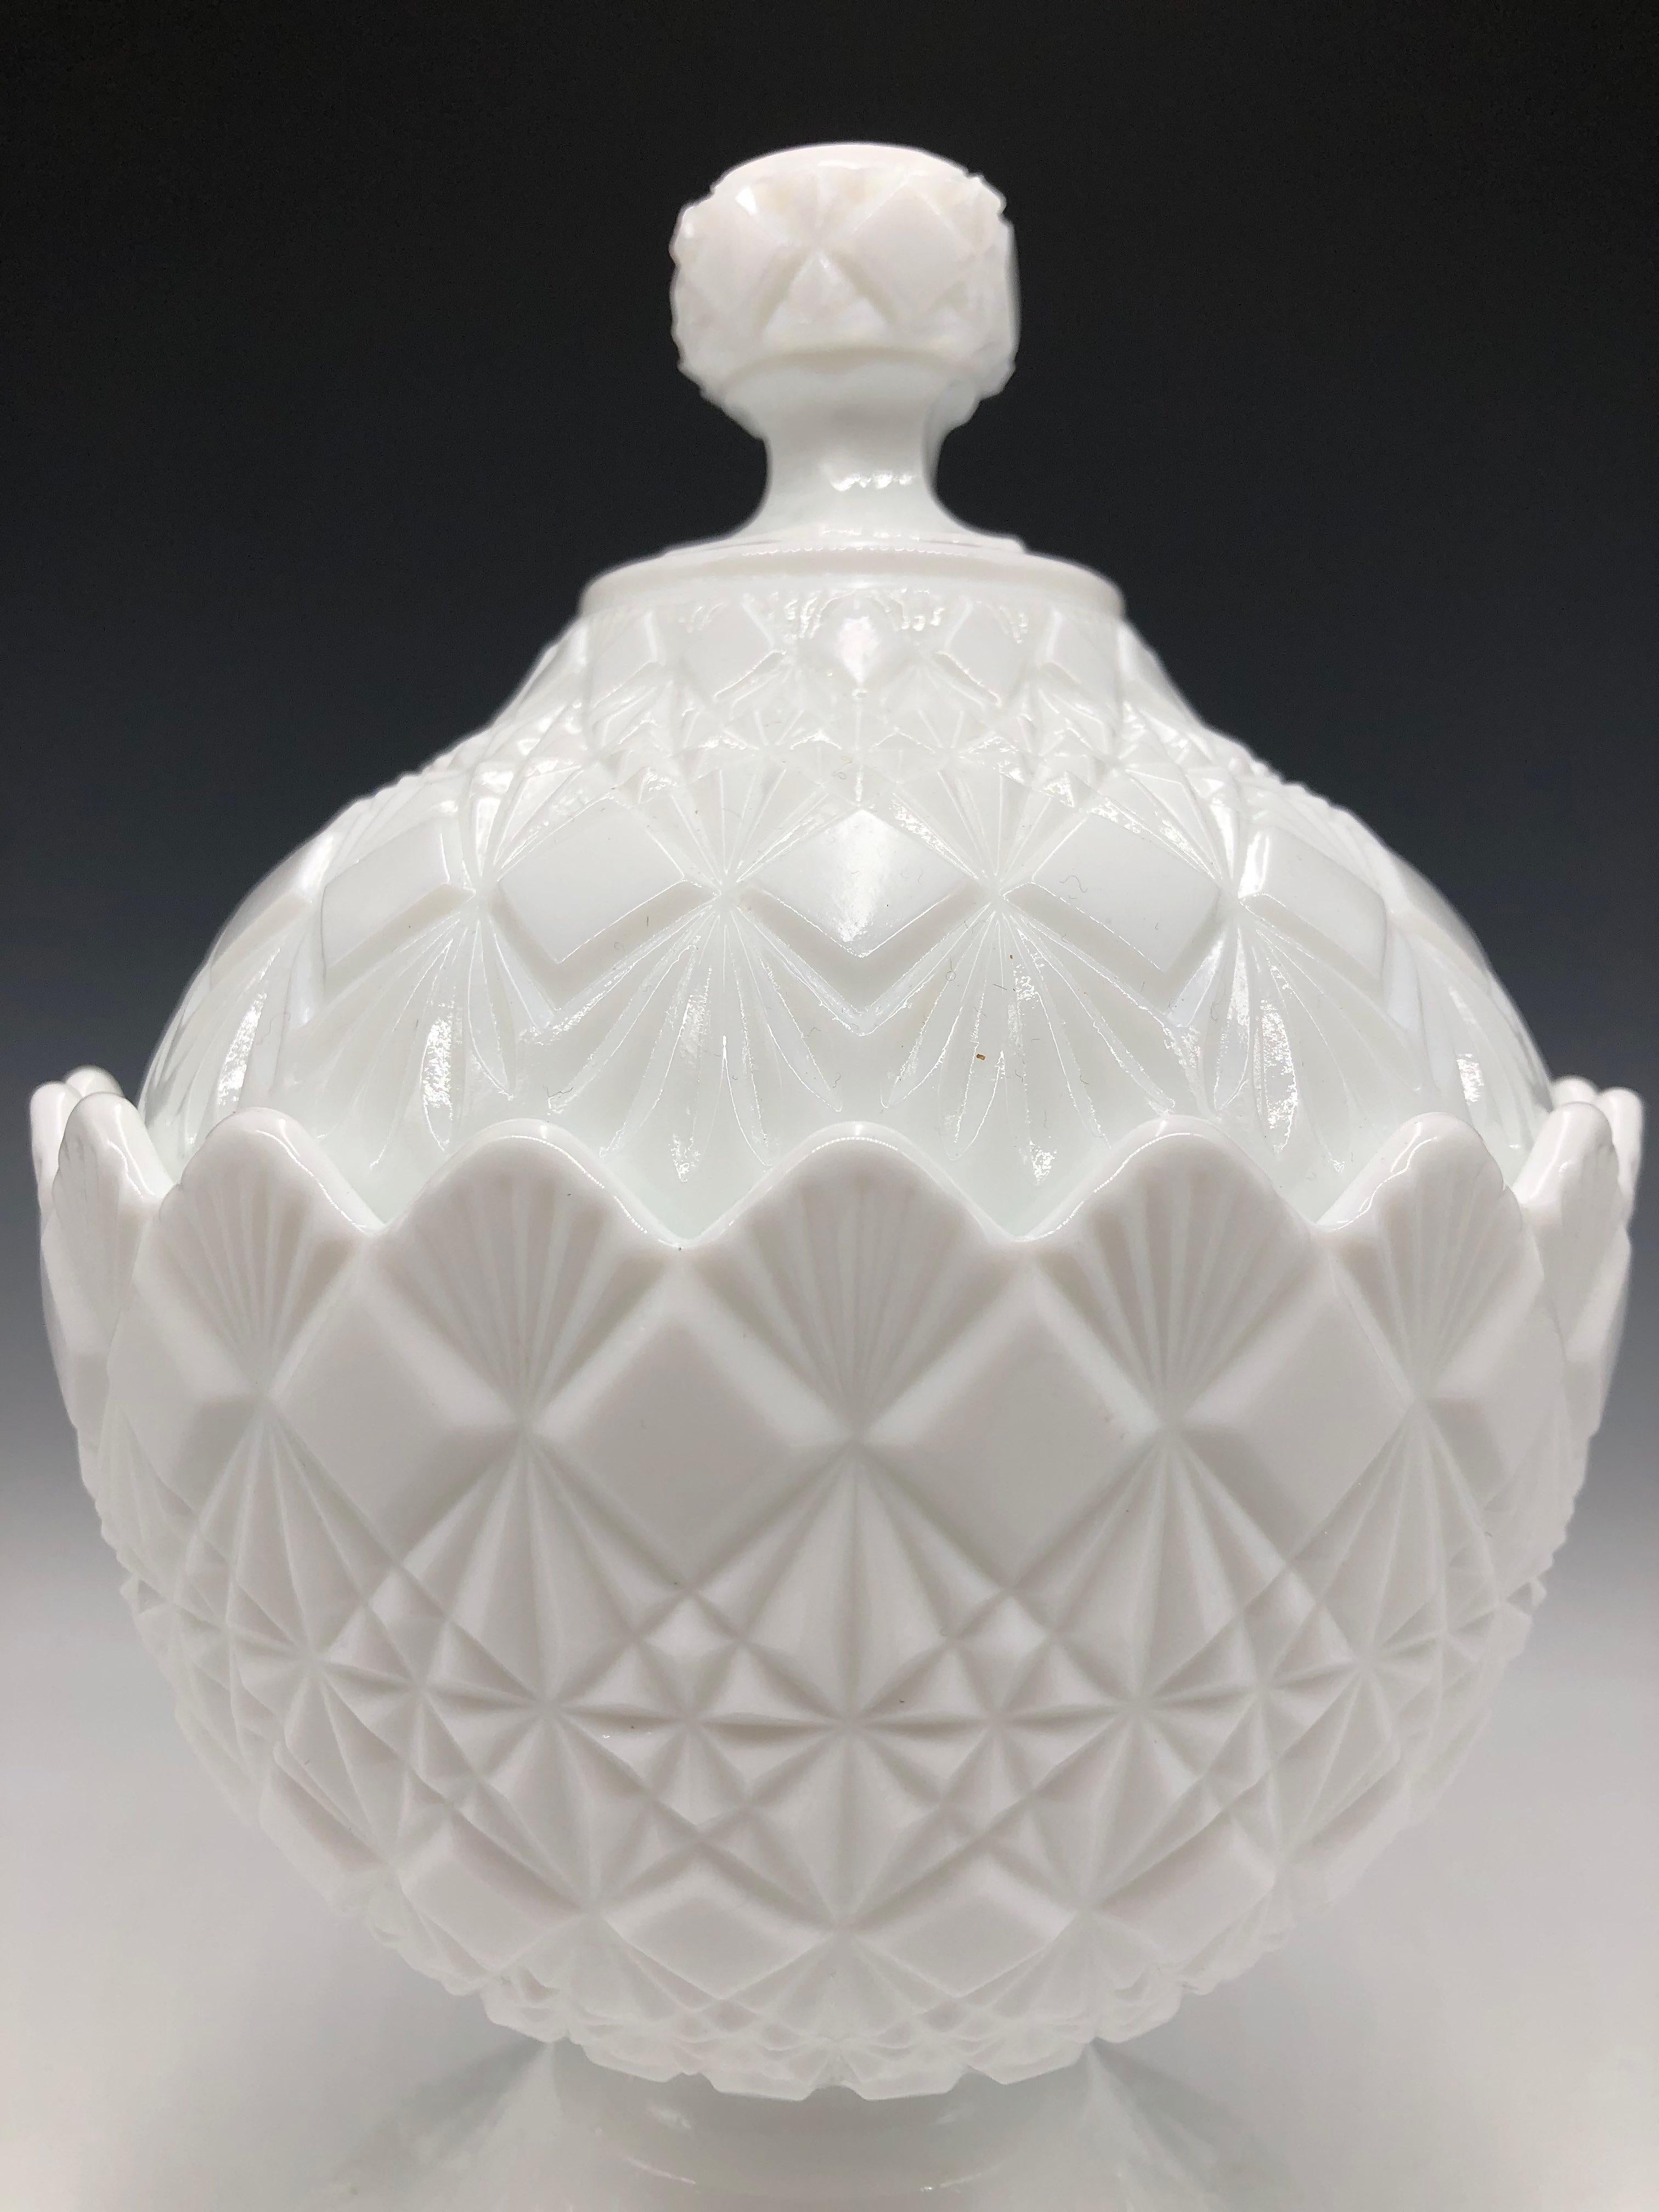 1960s White Fenton Olde Virginia Glass Pedestal Candy Dish with Lid In Excellent Condition For Sale In East Quogue, NY